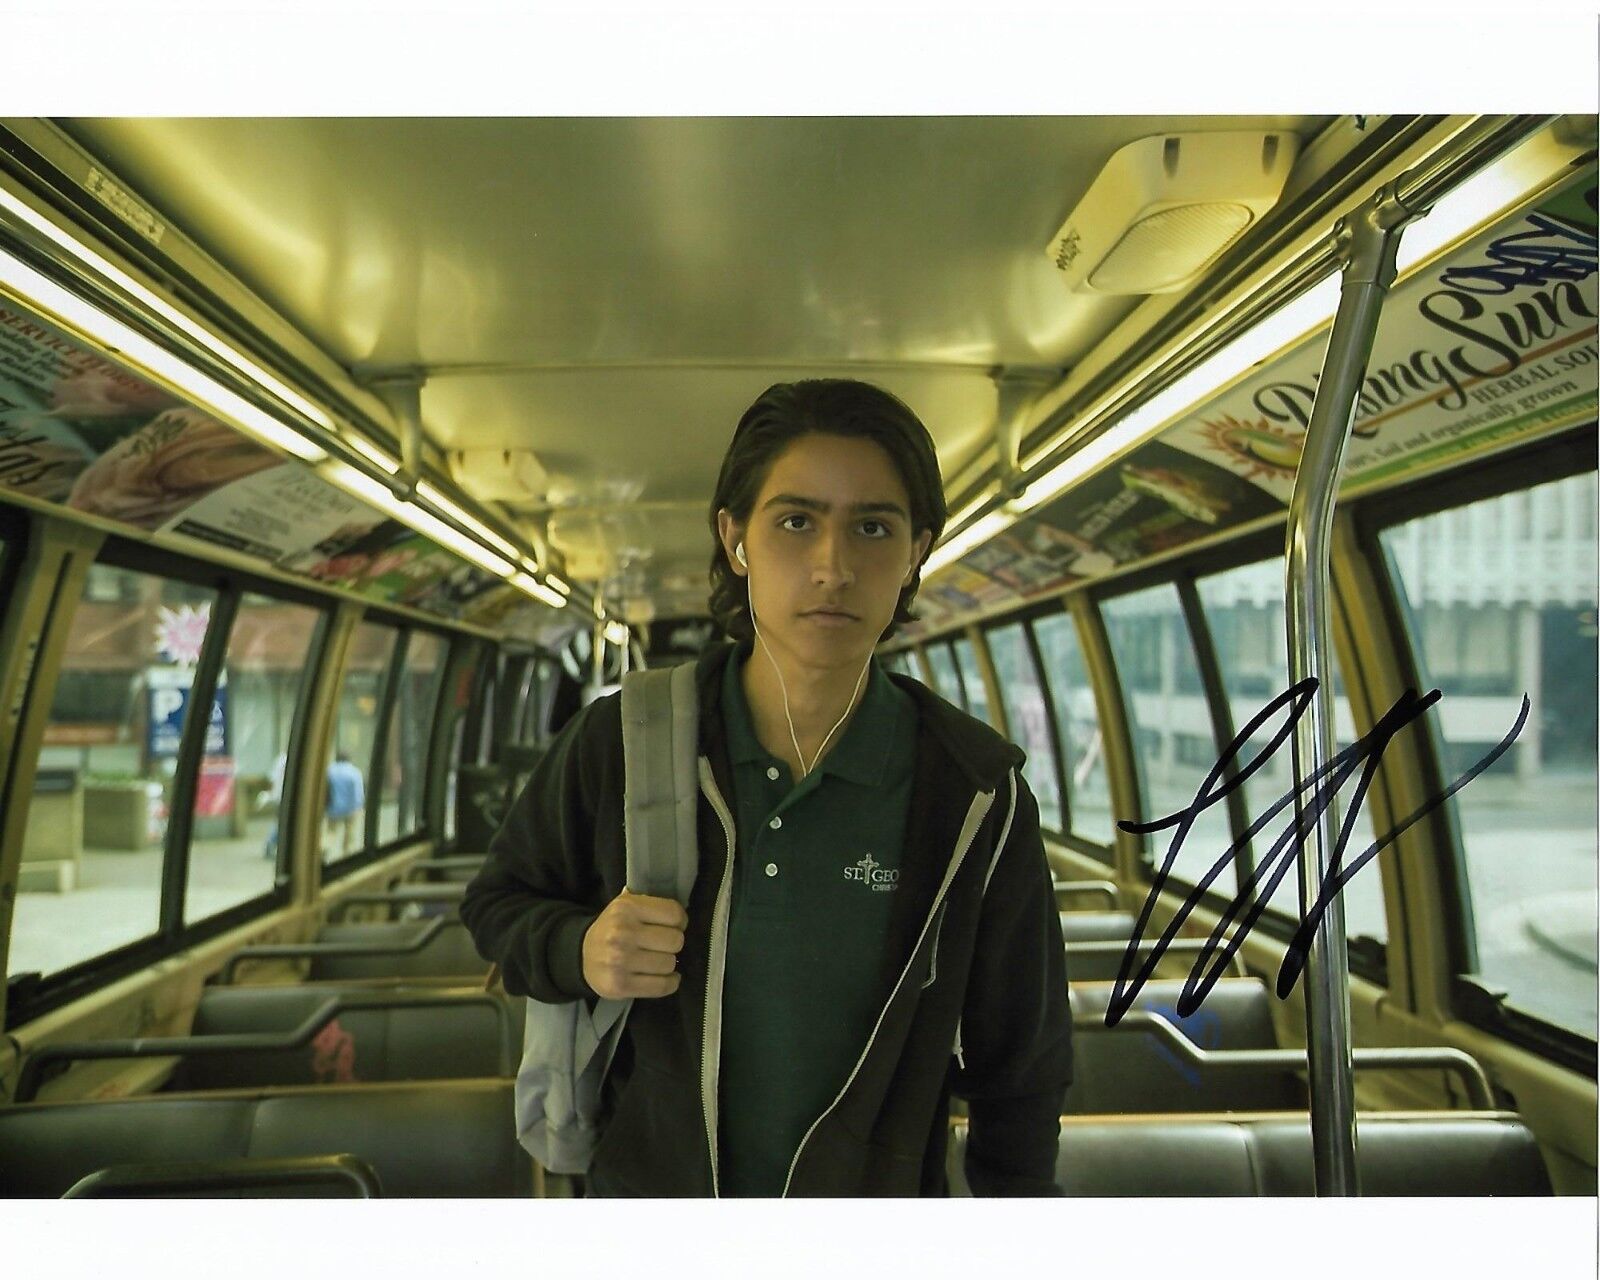 LORENZO HENRIE FEAR THE WALKING DEAD AUTOGRAPHED Photo Poster painting SIGNED 8X10 #9 CHRIS